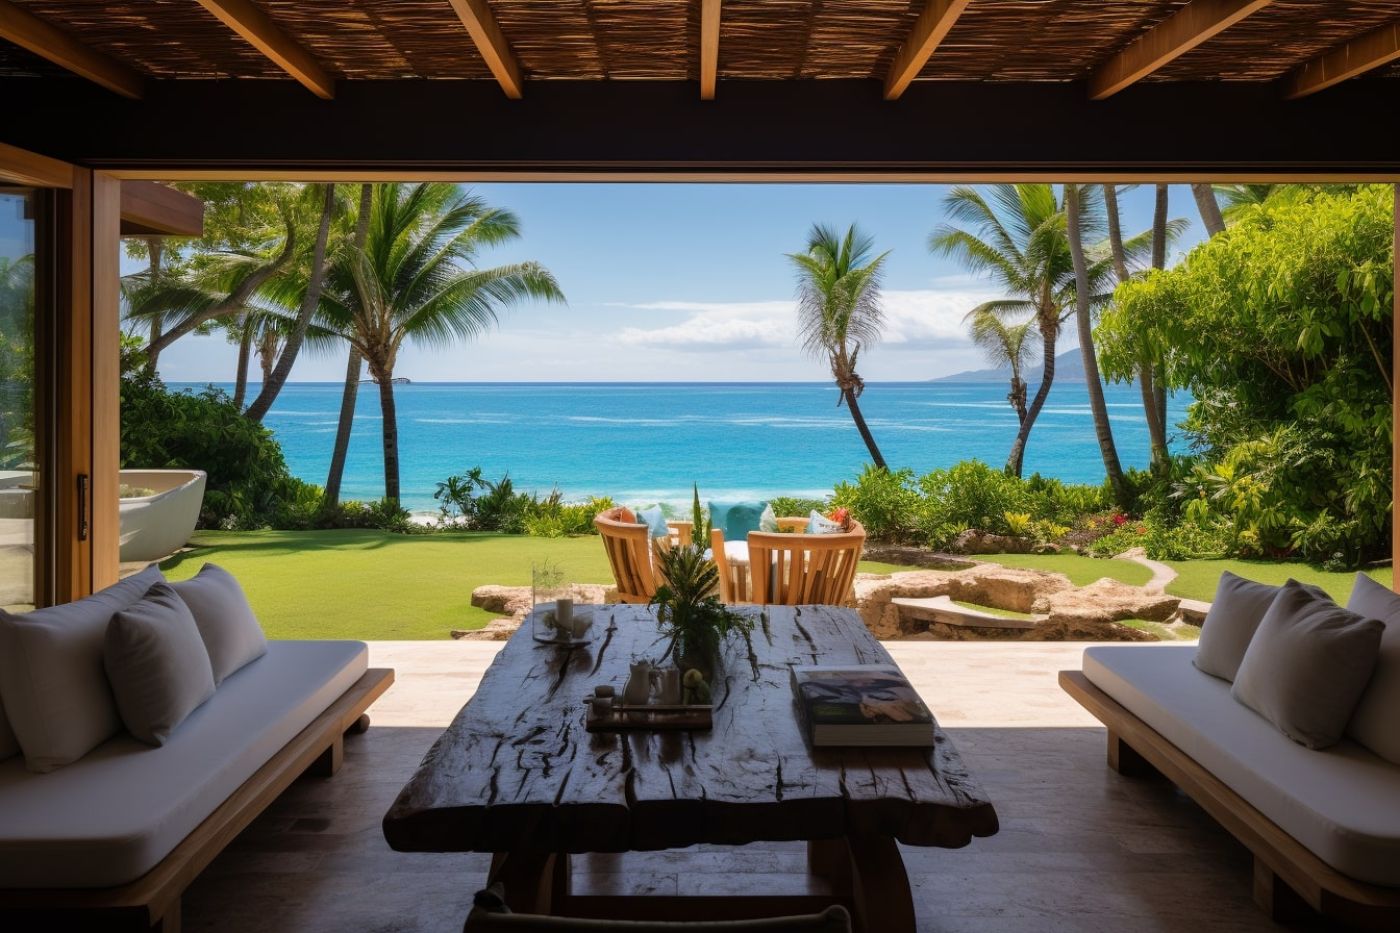 Transform Your Home with Island Vibes: Fresh Hawaii Home Remodeling Inspirations